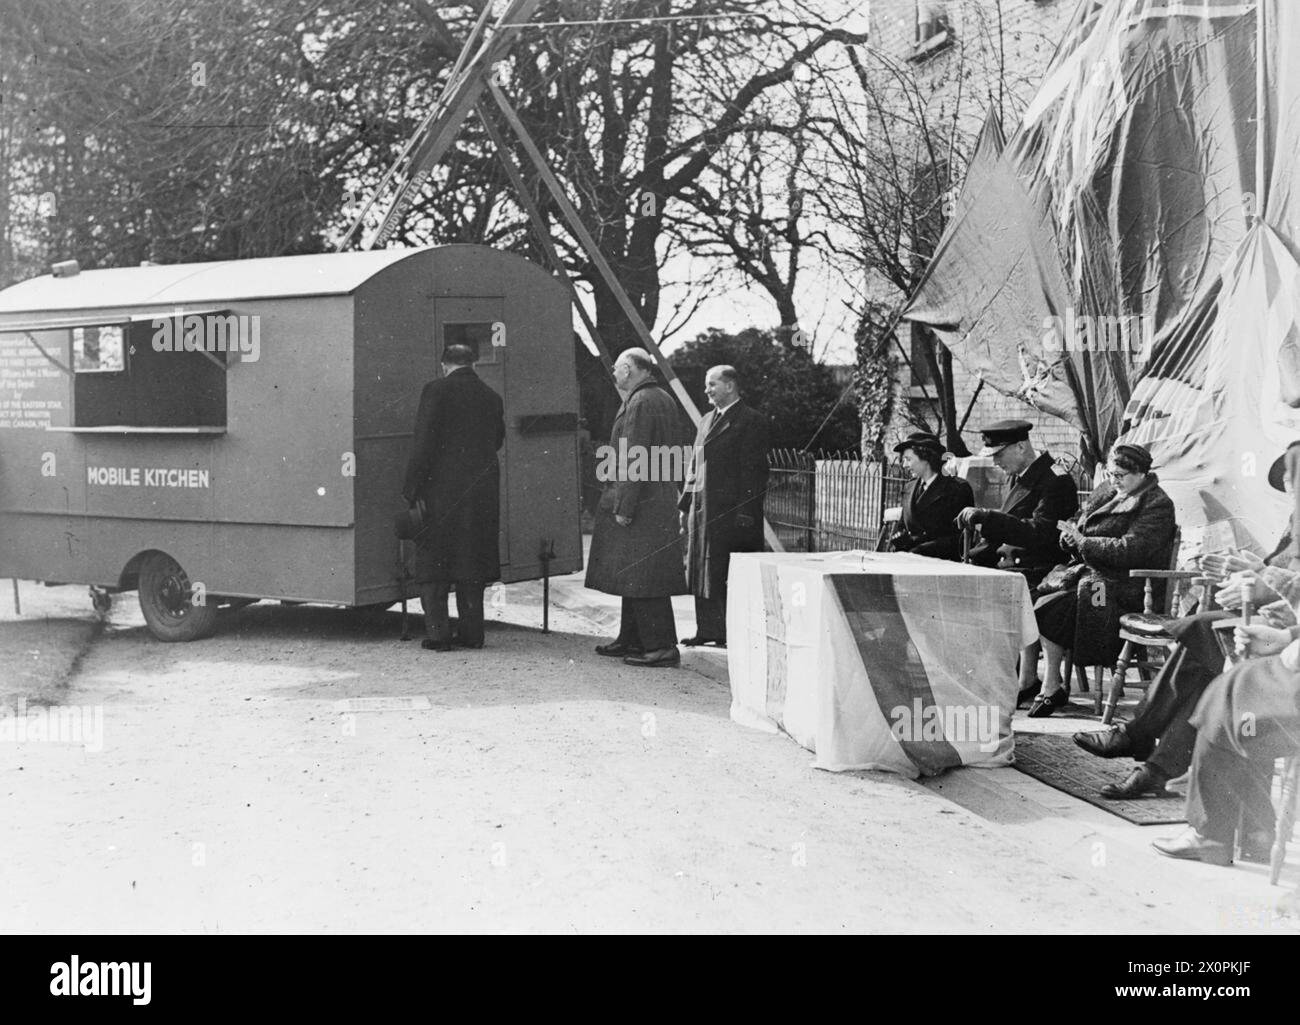 A GIFT FROM KINGSTON ONTARIO. MARCH 1944, GOSPORT. A TRAILER KITCHEN CAR IS THE GIFT OF THE ORDER OF THE EASTERN STAR, DISTRICT NO 13, KINGSTON, ONTARIO, CANADA, TO THE ROYAL NAVAL ARMAMENT DEPOT, GOSPORT. IT WAS PRESENTED BY COL D C UNWIN SIMSON, ADMINISTRATIVE SECRETARY, CANADA, ACTING ON BEHALF OF THE CANADIAN HIGH COMMISSIONER, AND WAS RECEIVED ON BEHALF OF THE DOCKYARD WORKERS BY MR K BOUTWOOD, SUPT ARMAMENT SUPPLY OFFICER. THE C IN C PORTSMOUTH, ADMIRAL SIR CHARLES J C LITTLE, REAR ADMIRAL SIR ARTHUR BROMLEY, OF THE DOMINIONS OFFICE, AND VICE ADMIRAL M L CLARKE, ADMIRAL SUPT PORTSMOUTH D Stock Photo